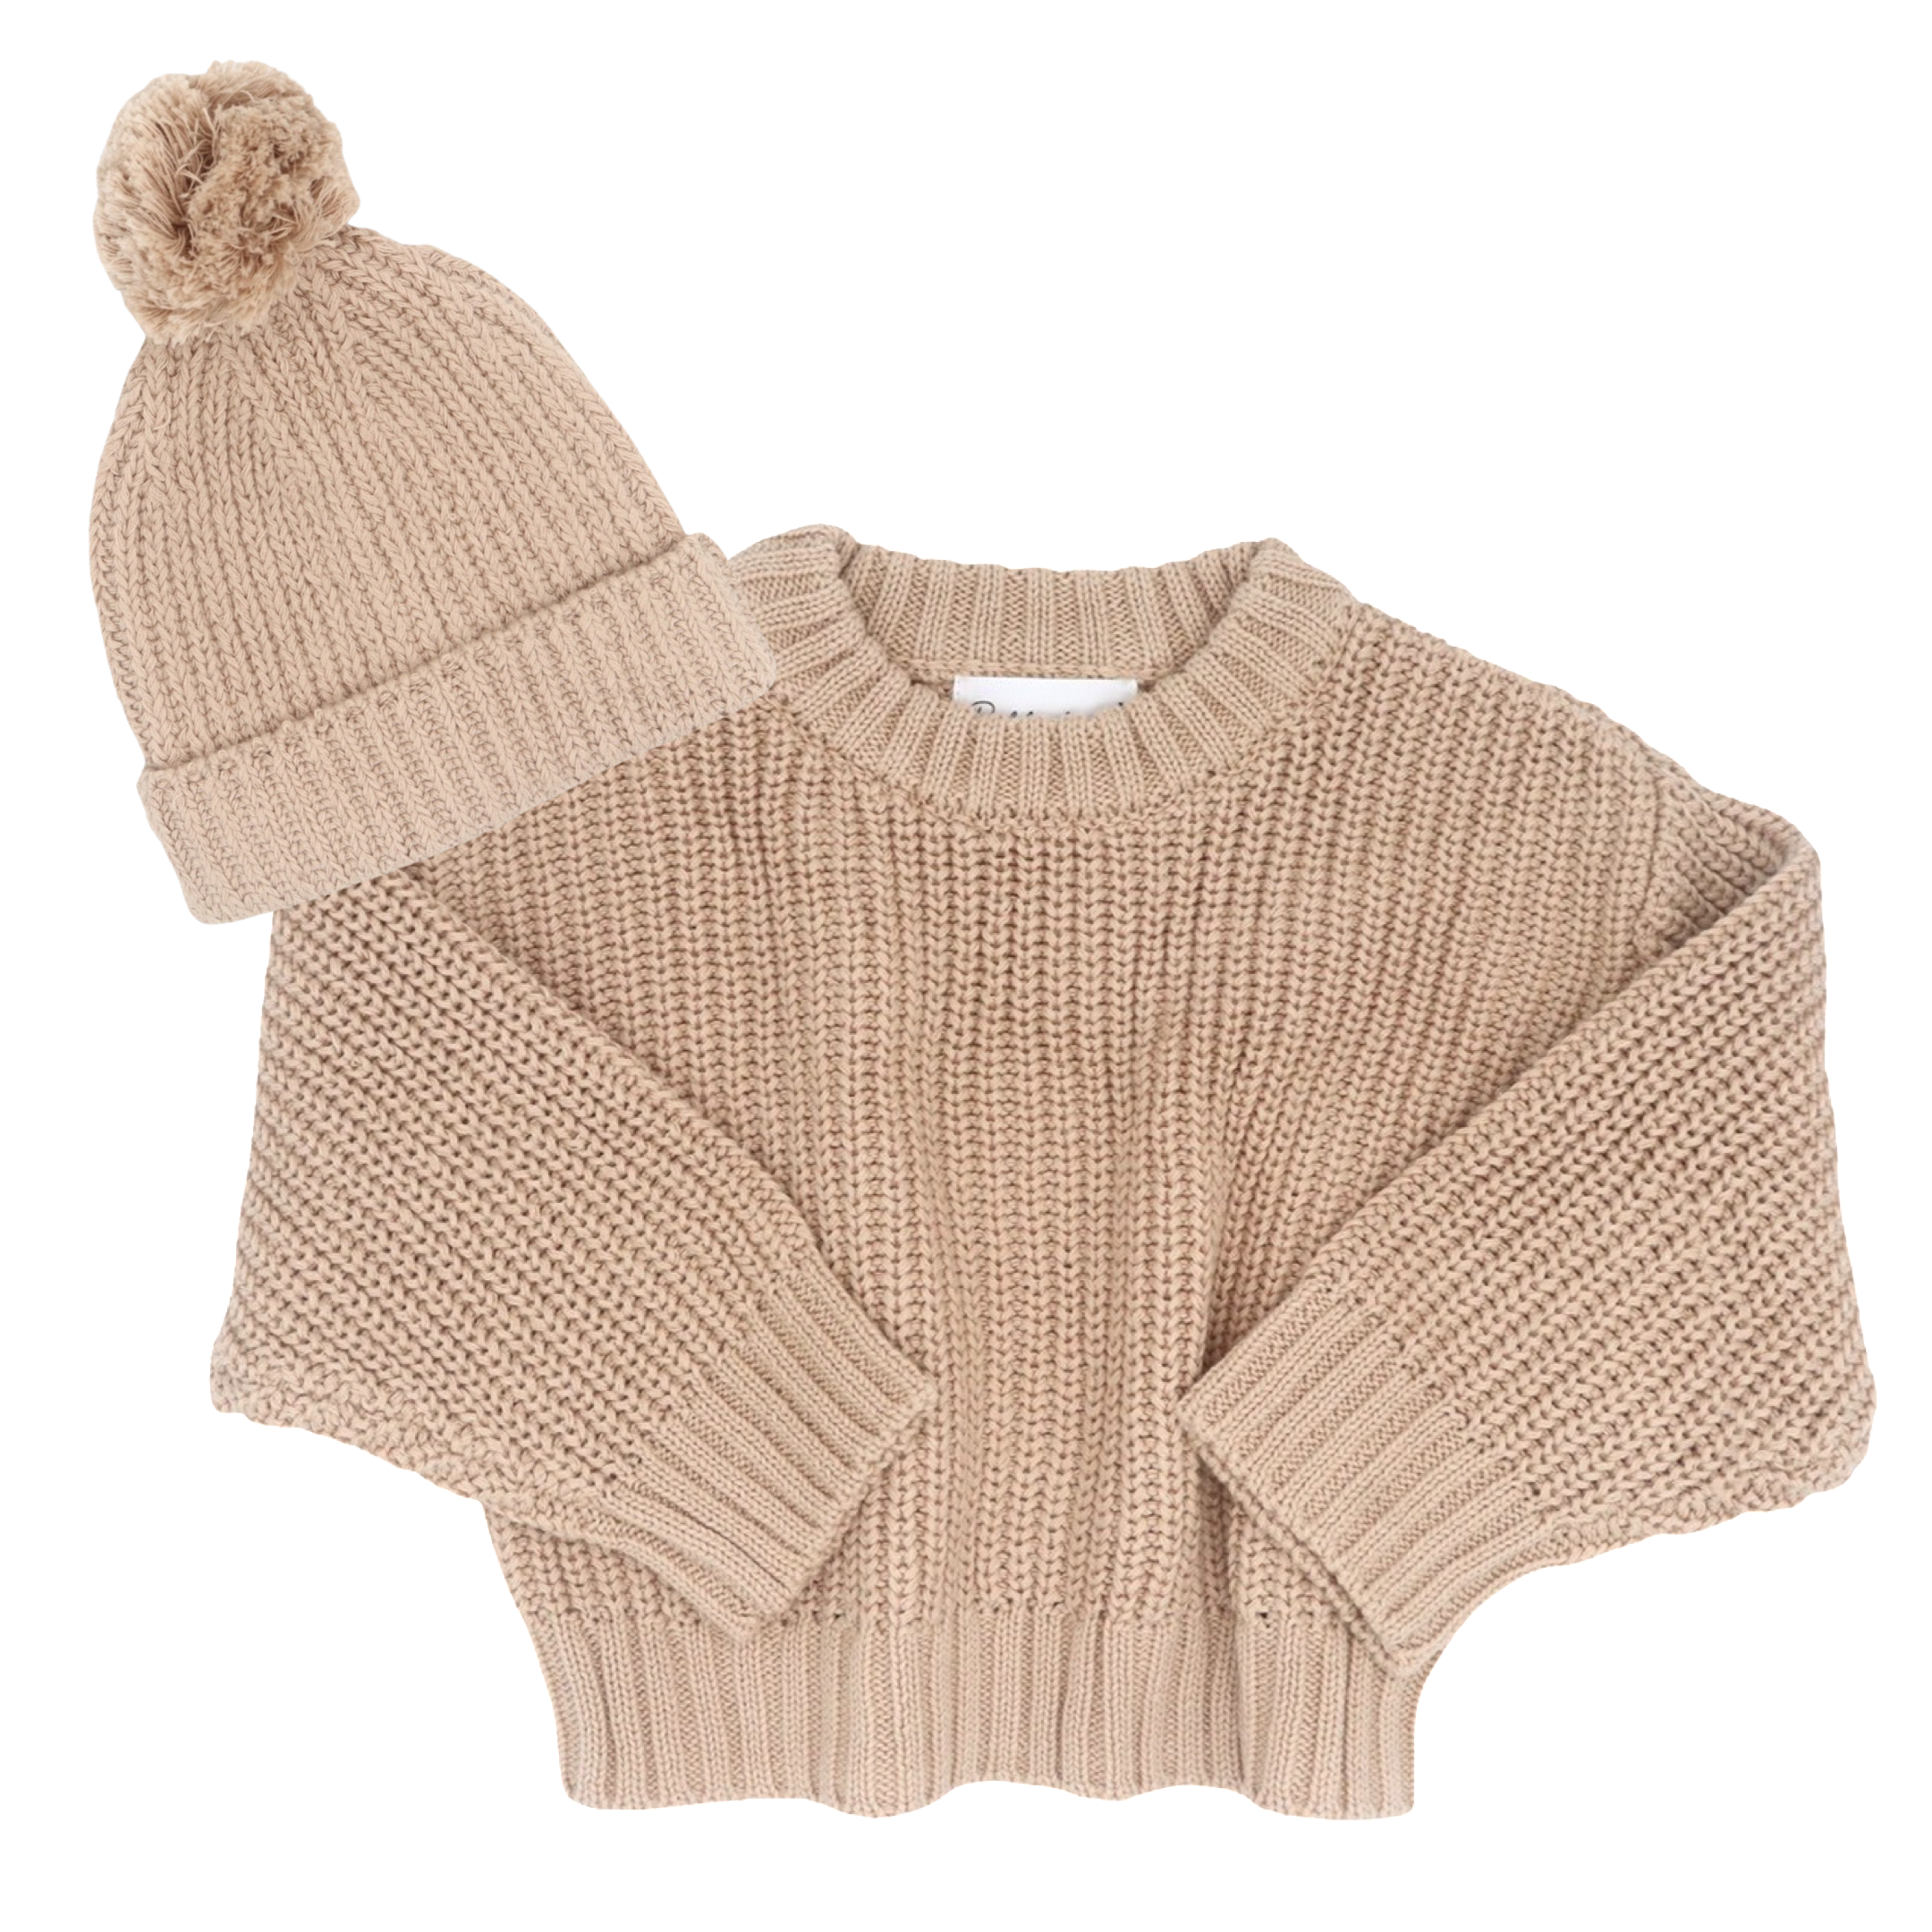 Bubbadue Knitted Baby Jersey & Beanie Set - Toffee - Bubbadue